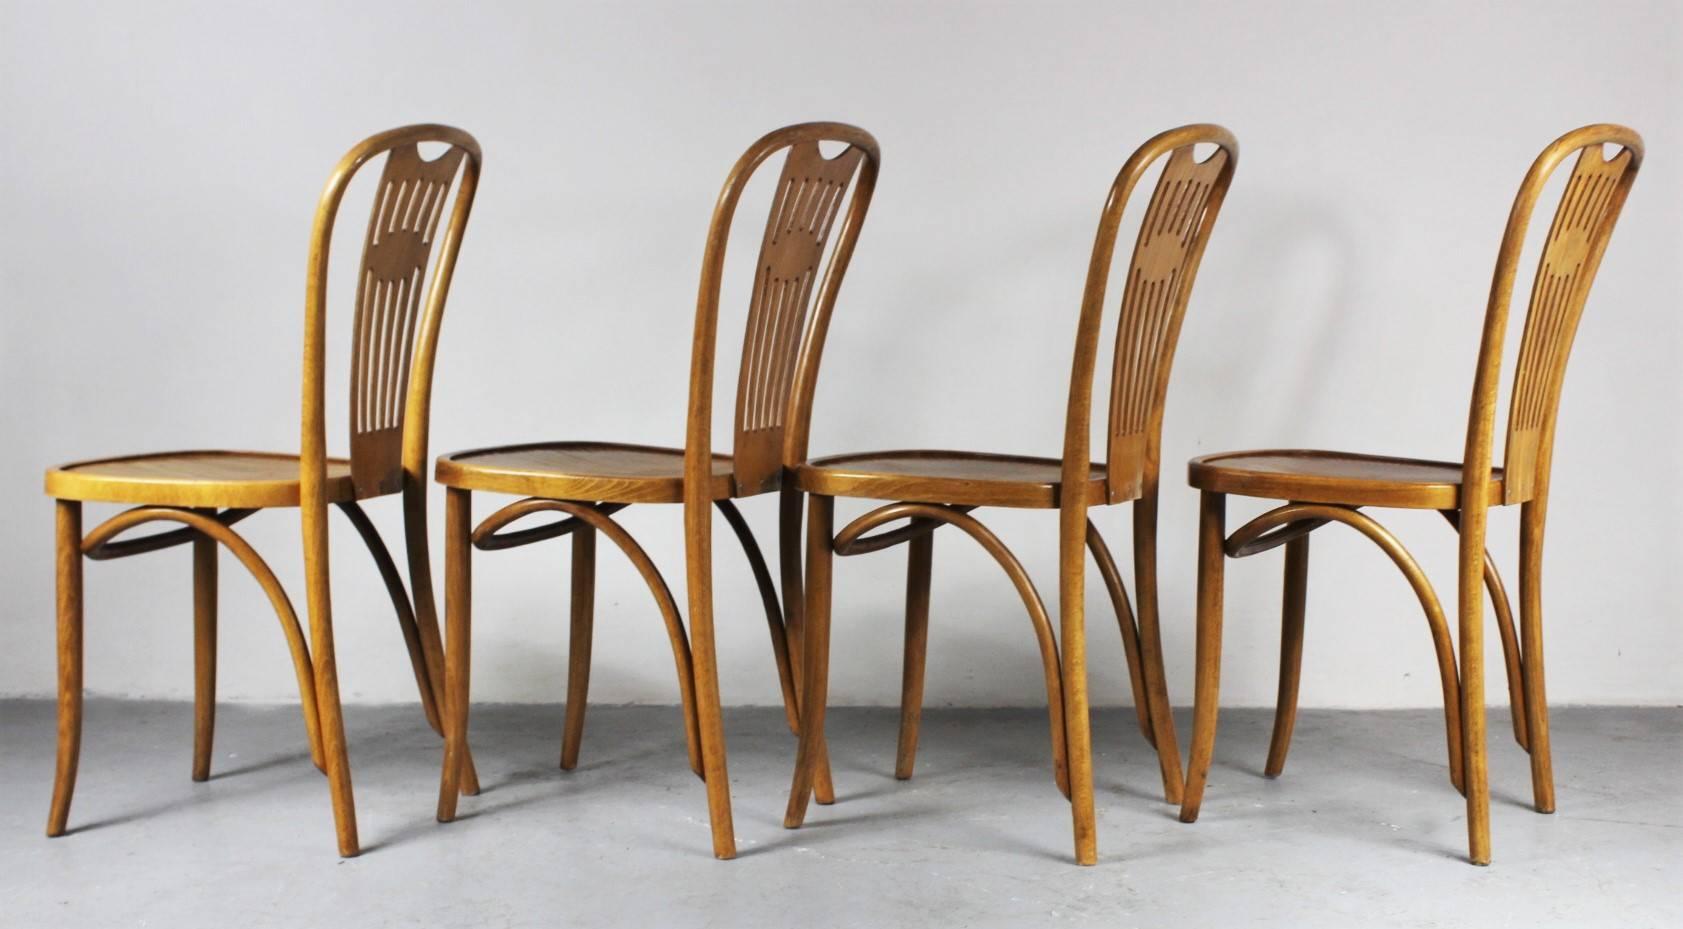 Set of four Thonet bistro chairs from the 1950s. Floral decoration on the seat. Chairs are in good original condition.